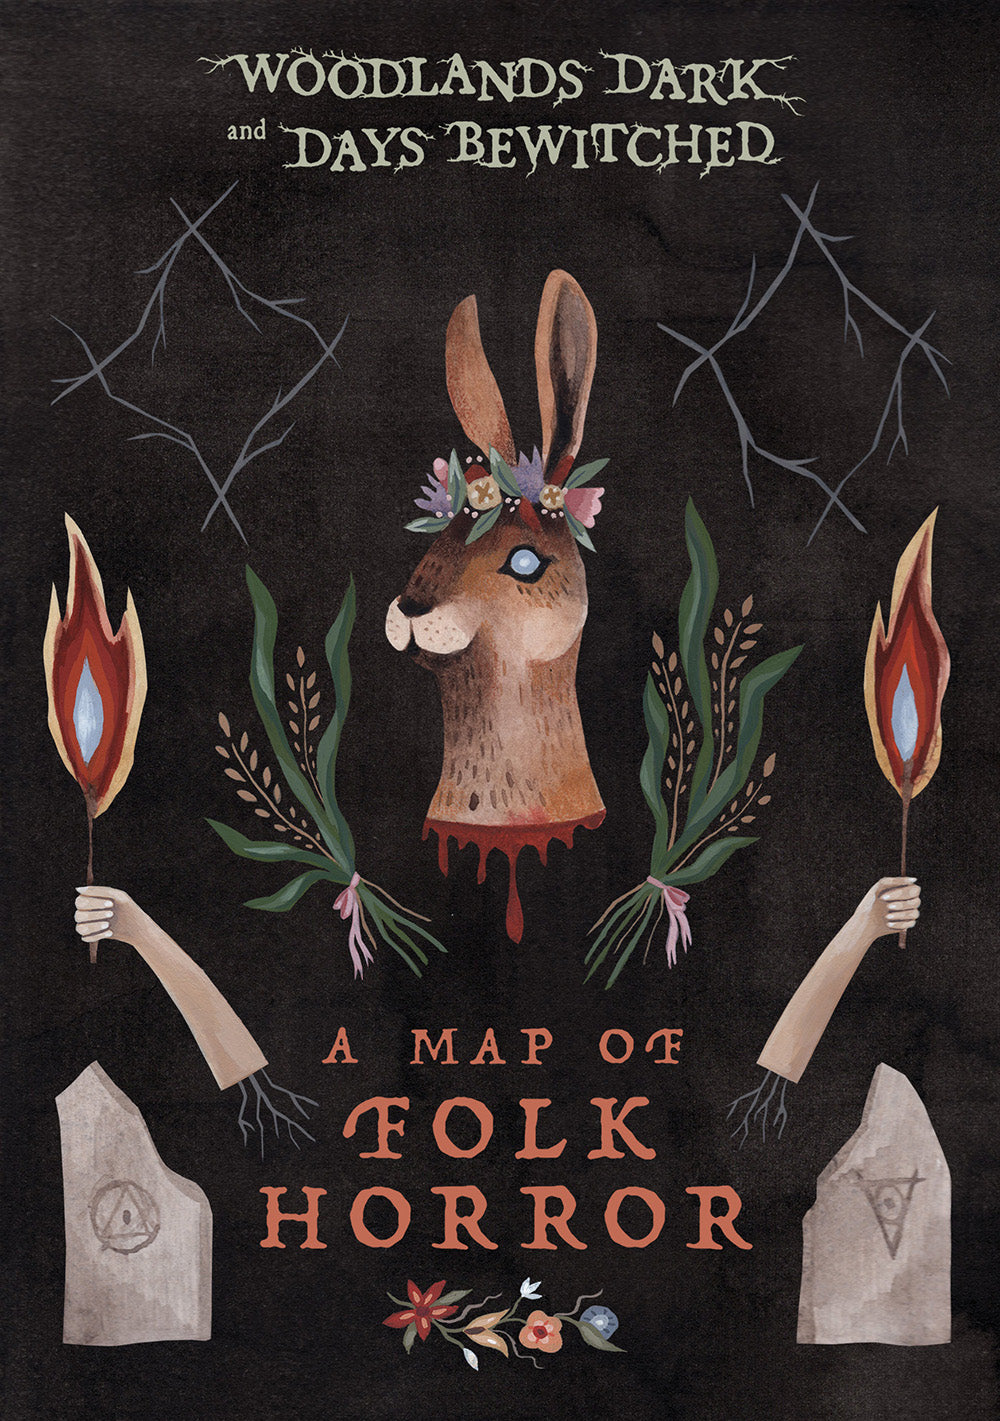 Woodlands Dark and Days Bewitched: A Topographical Guide to Folk Horror